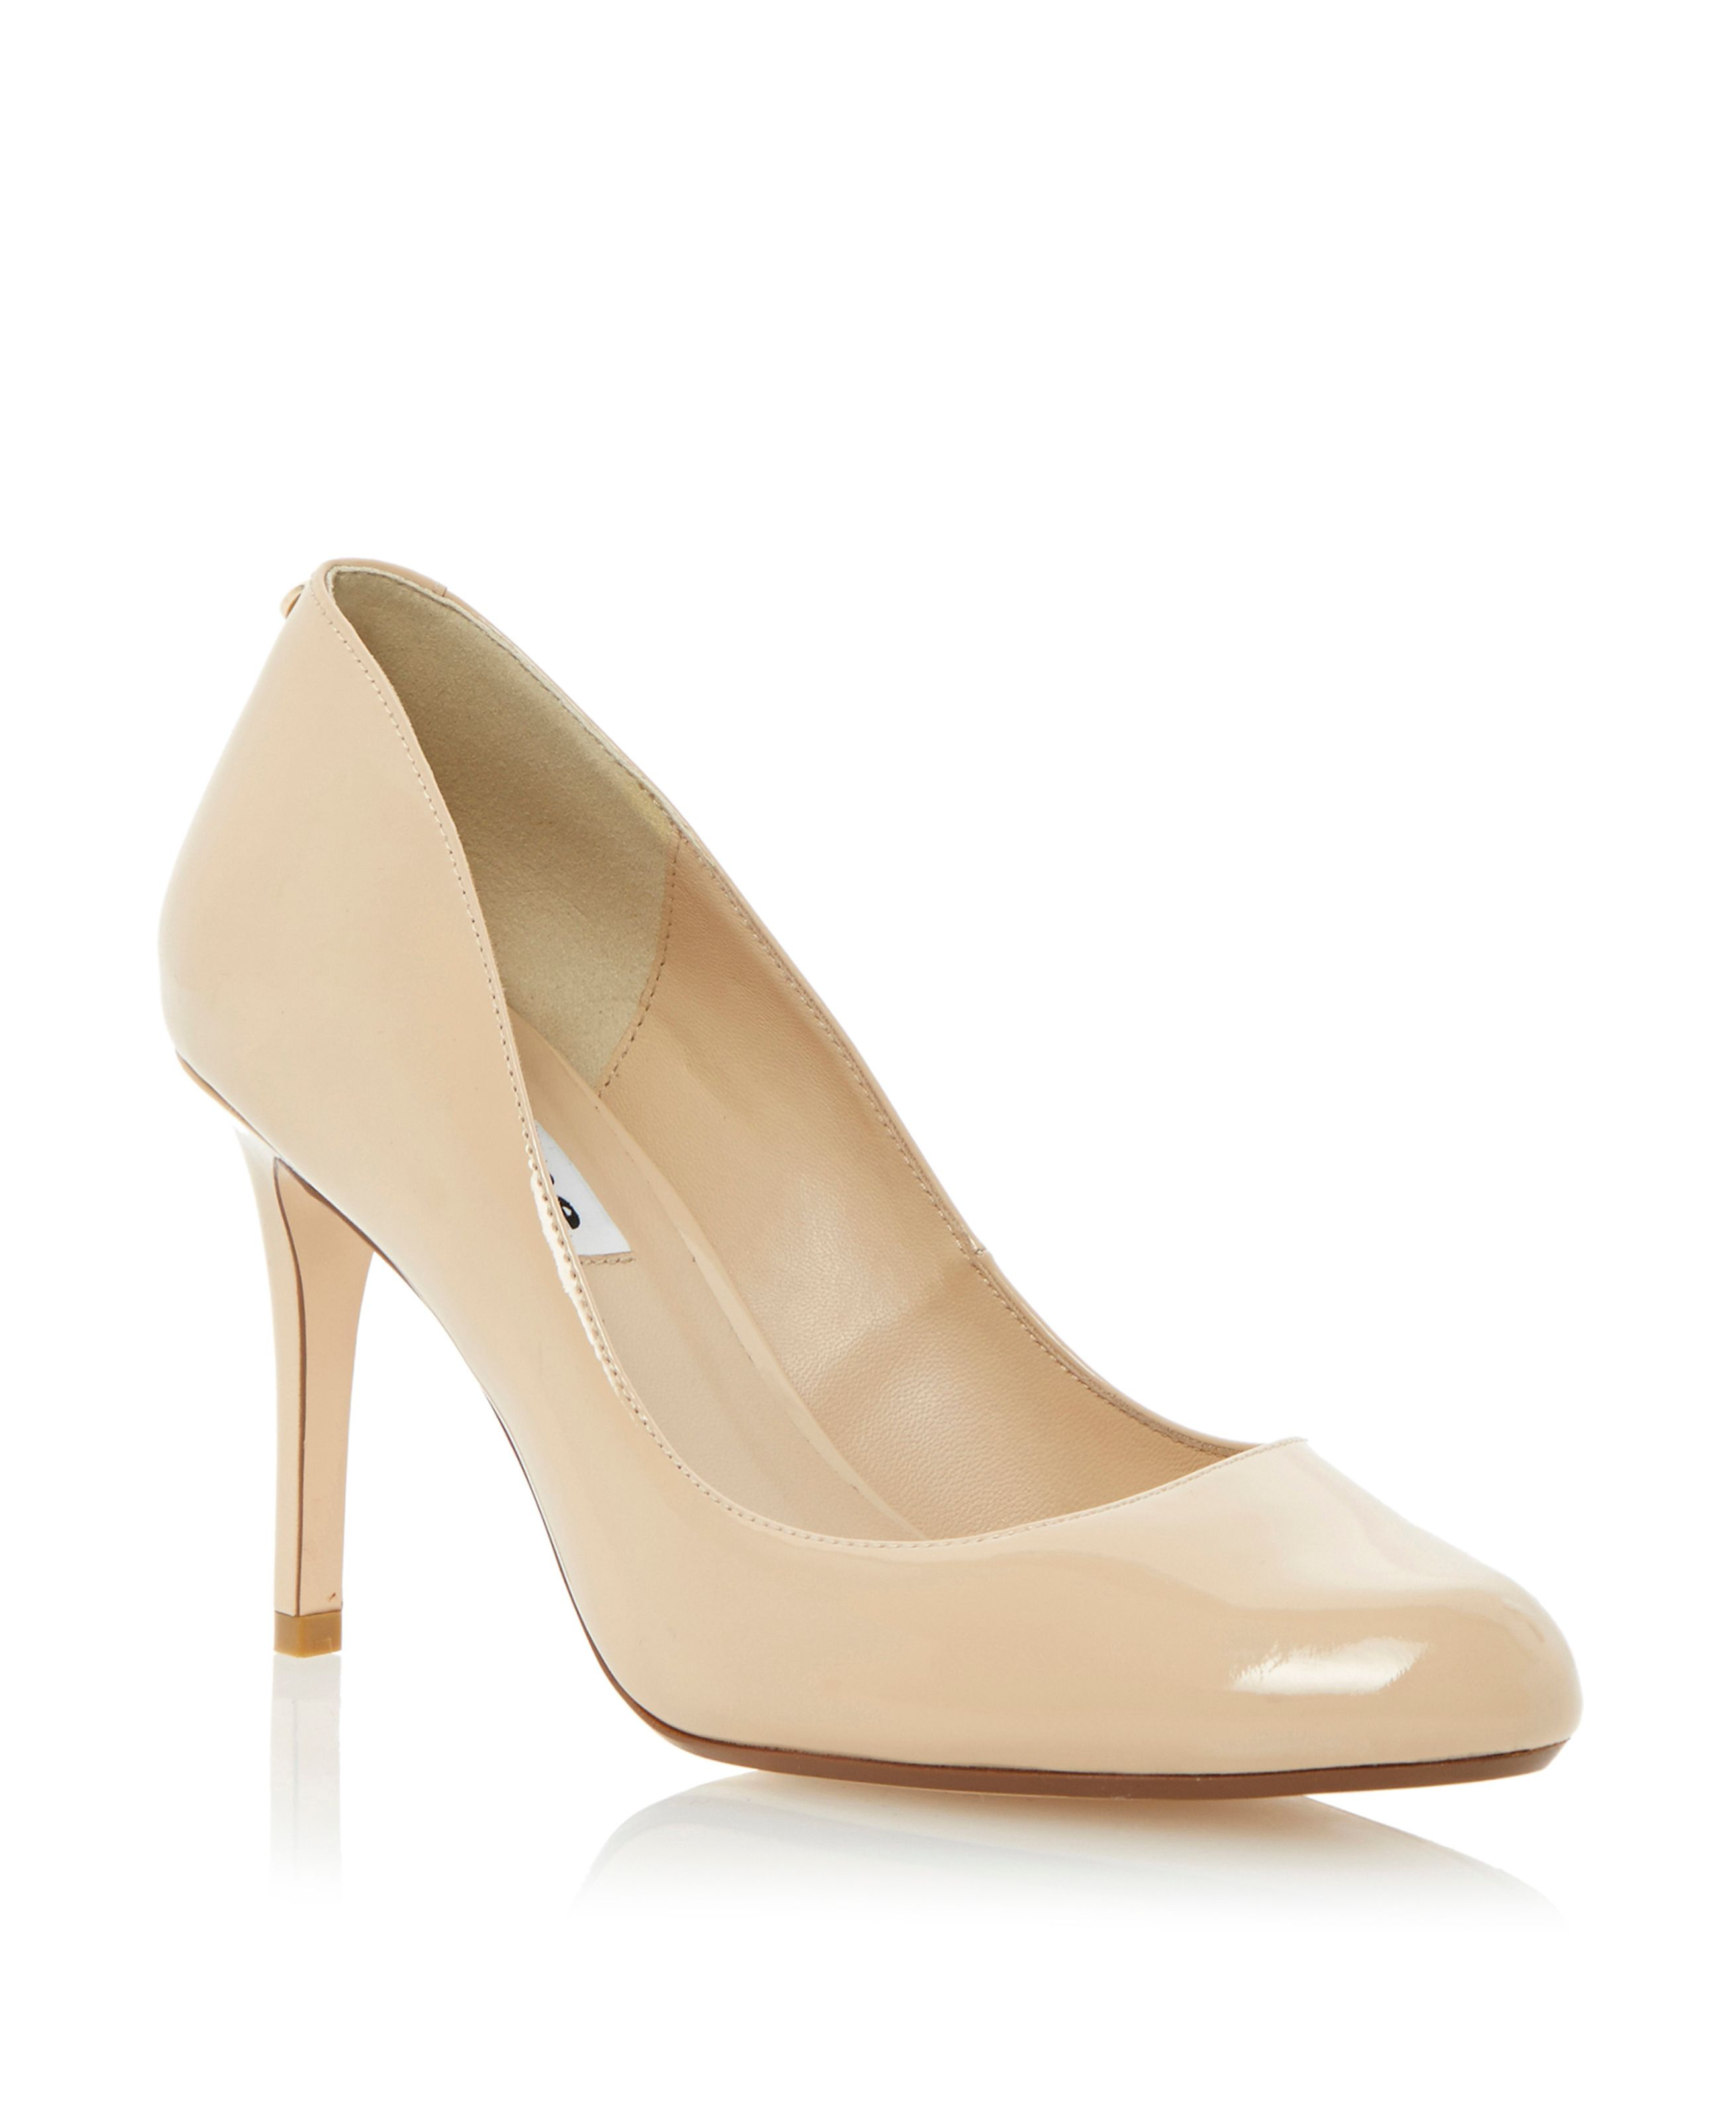 Dune Allie Patent Stiletto Almond Toe Court Shoes in Beige (Nude) | Lyst